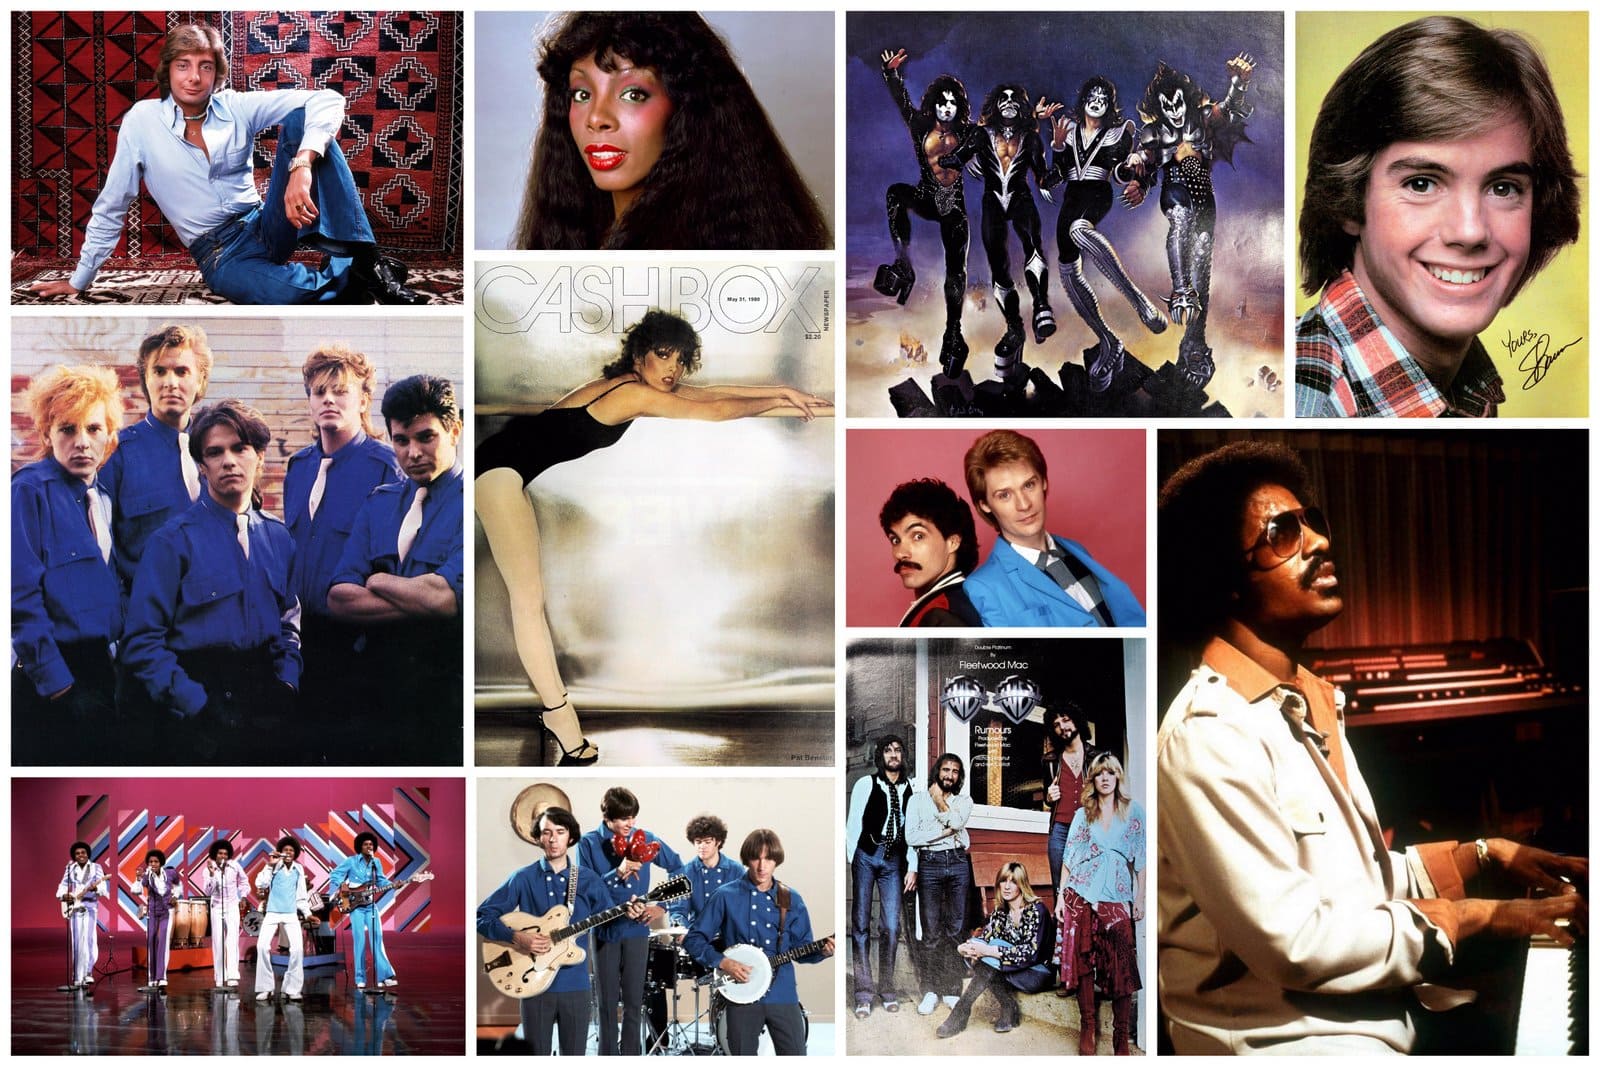 Nostalgic songs: Bands and singers from the 1970s and 1980s